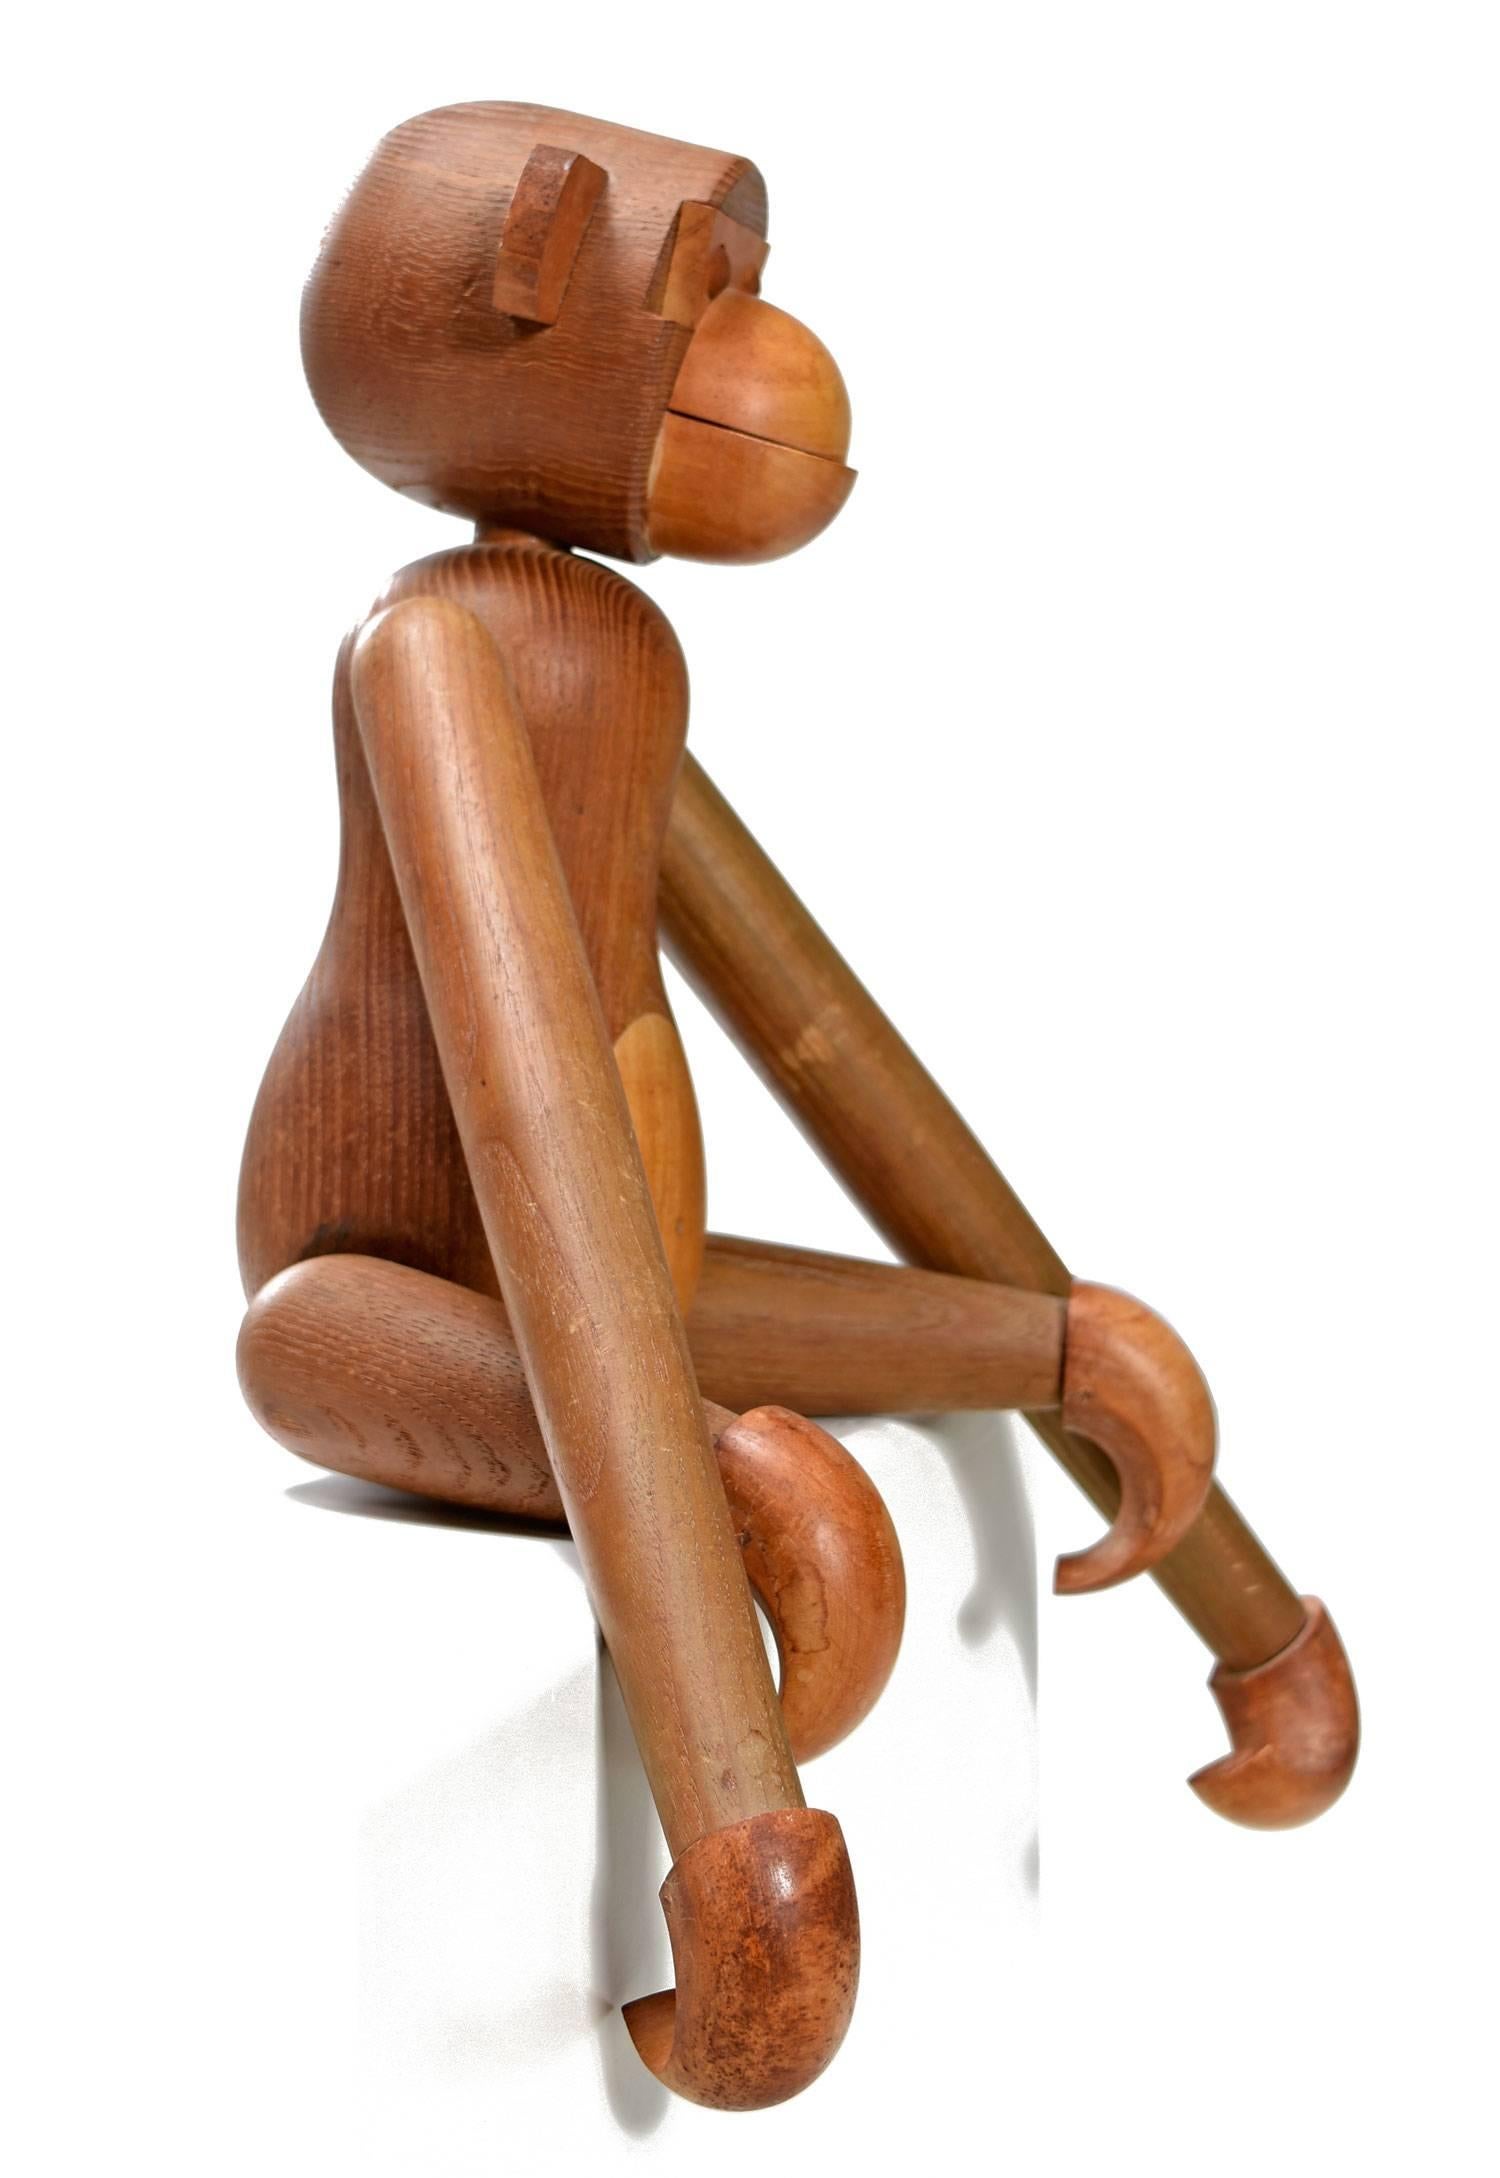 Iconic Scandinavian Modern Kay Bojesen style large wooden monkey, circa 1950s. This playful two-tone carved teak wood toy features movable, rotating arms, legs, and rounded hooked hands and feet. This smart and fun articulating toy can placed